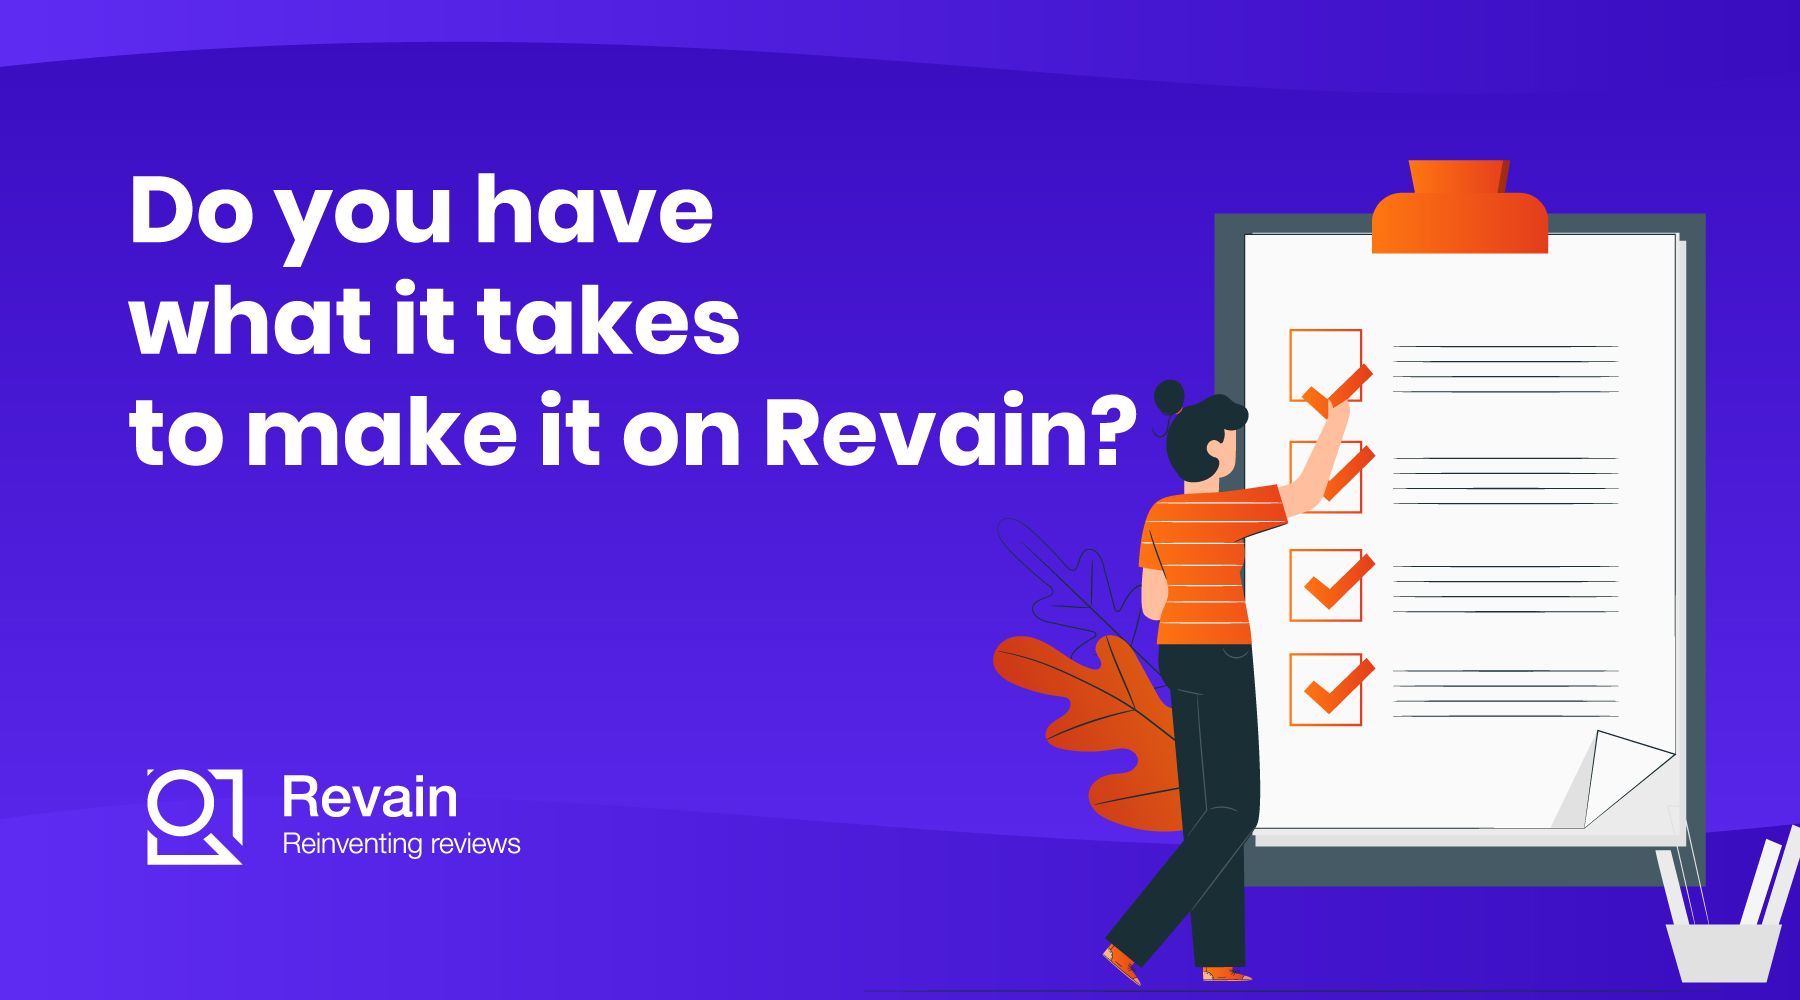 Article Do you have what it takes to make it on Revain? We think you do.